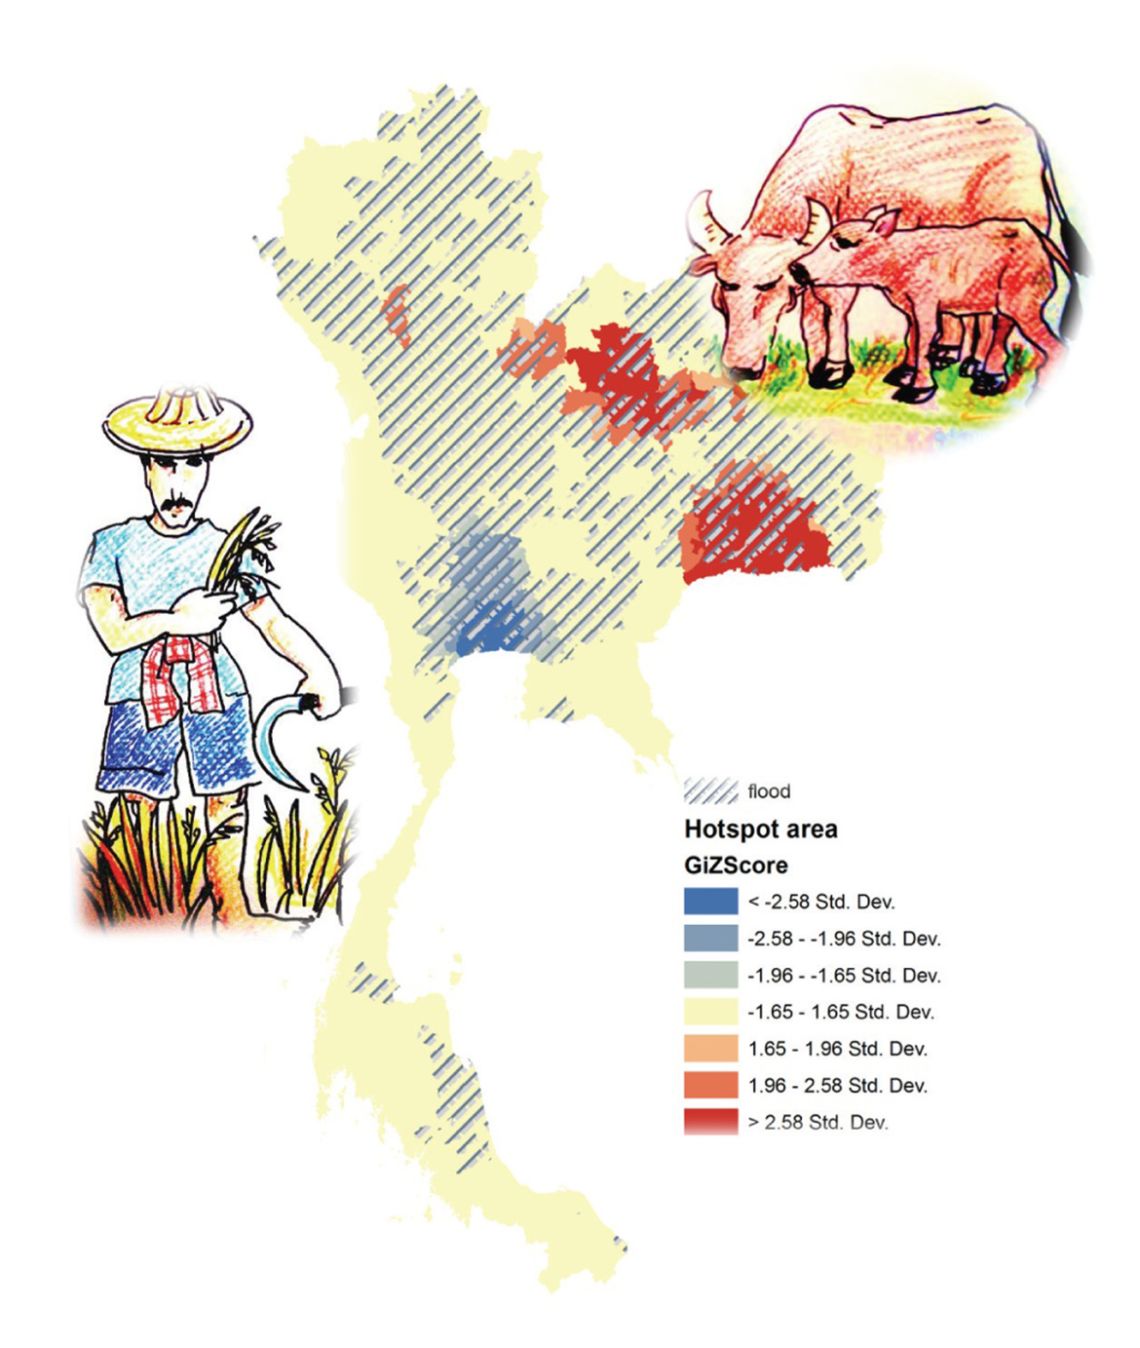 A Thailand map showing flooding areas and hotspot area GiZscore